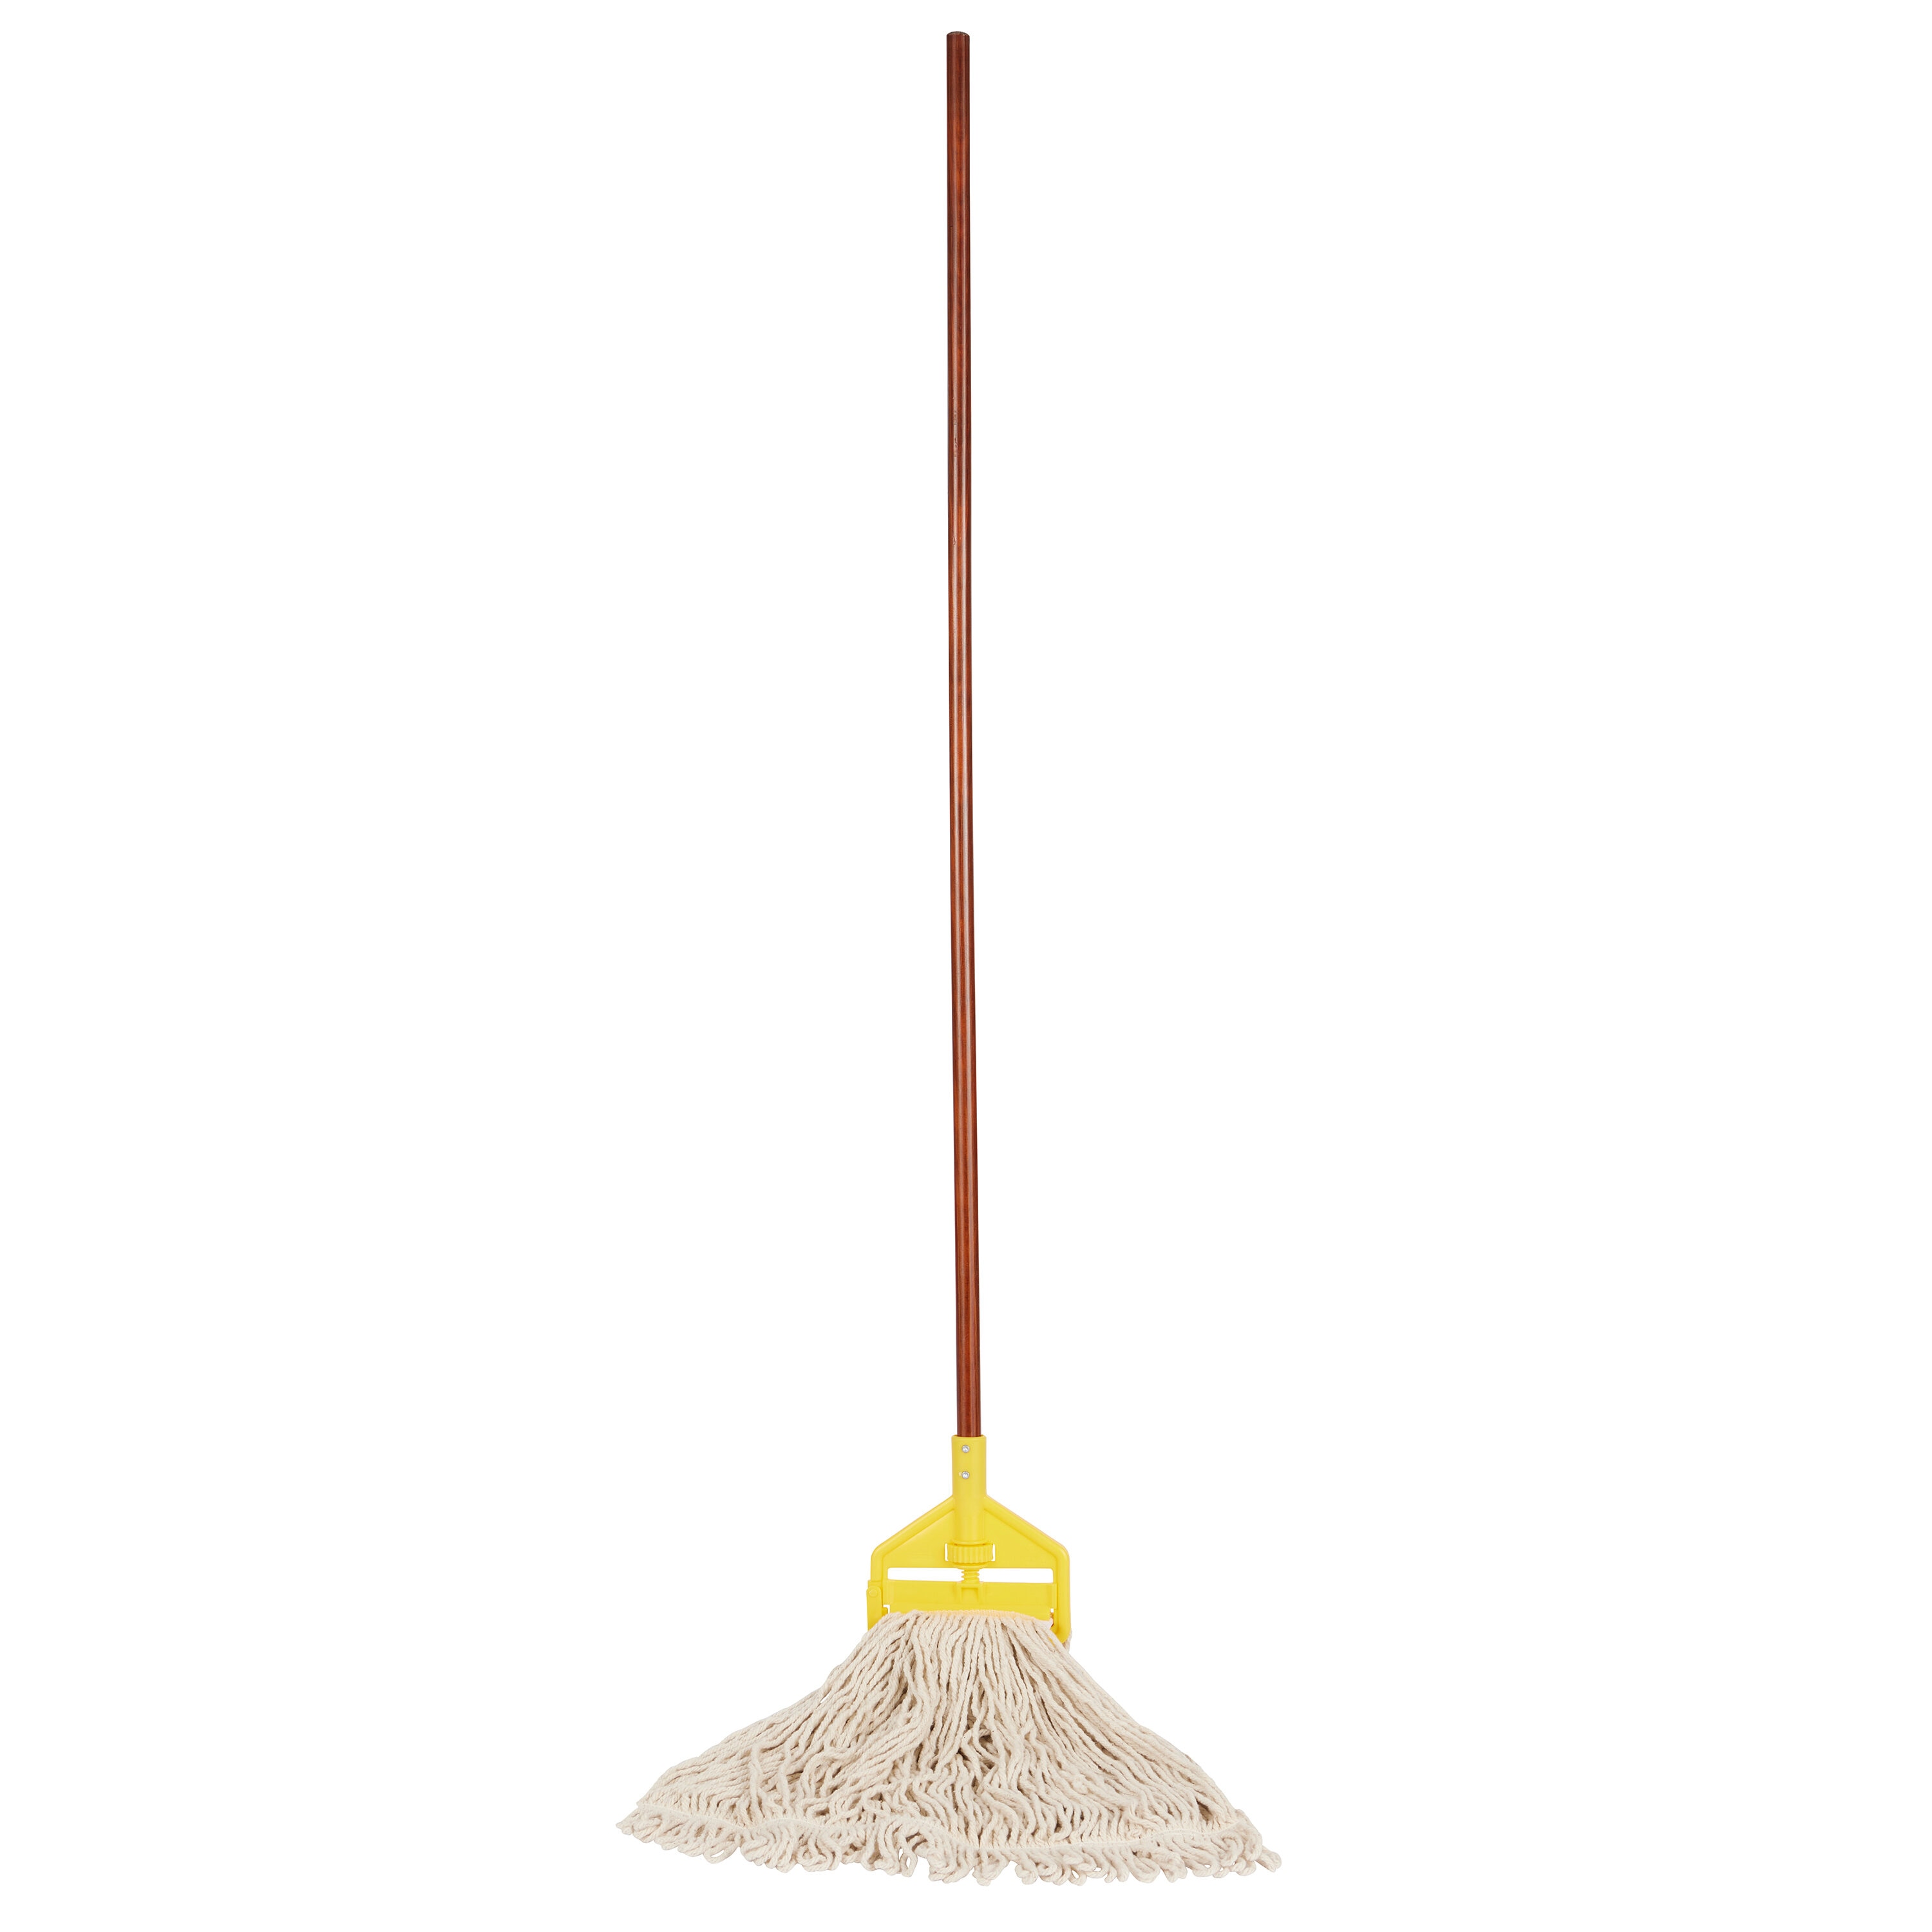 Wet String Floor Mop Heavy Duty Classic with Wooden Handle 4-ply